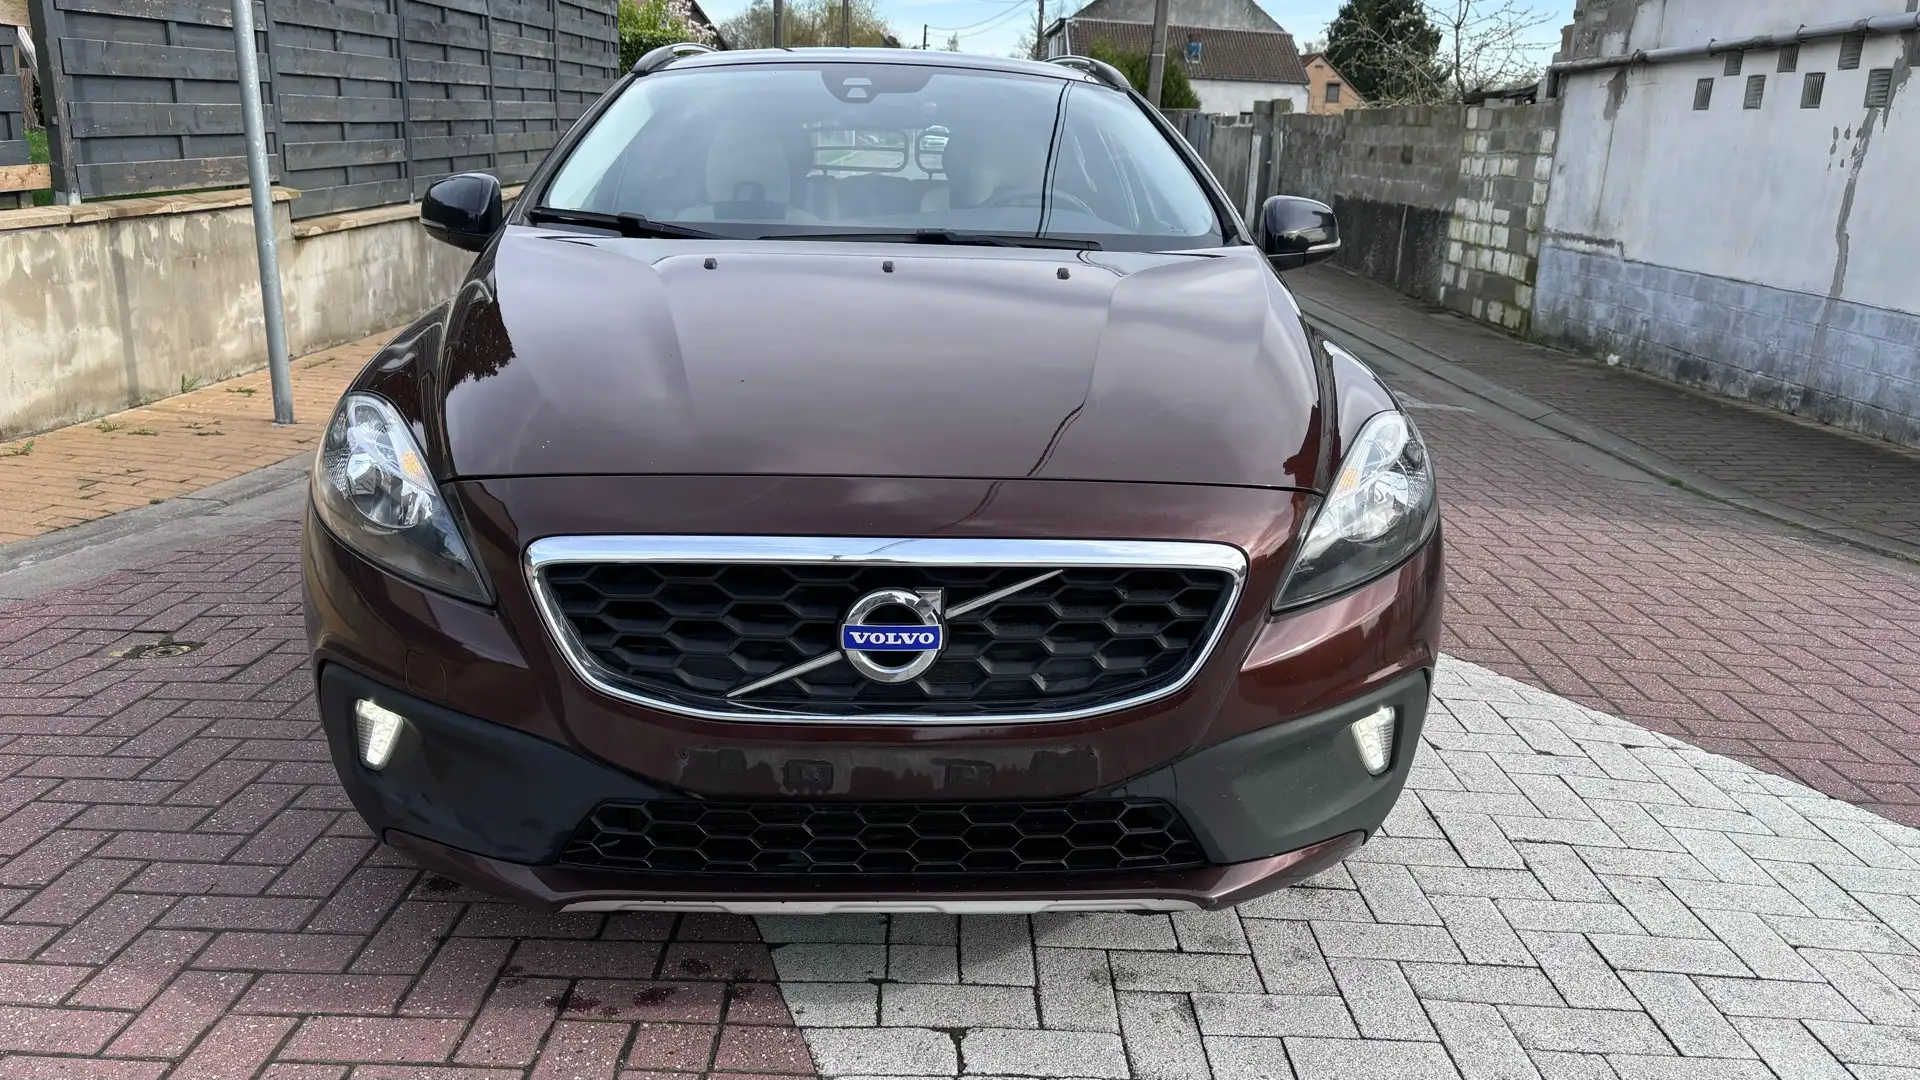 Volvo V40 Cross Country 2.0 D2/96gr/CUIR/GPS/PANO/LED EXPORT OU MARCHANDS Barna - 2